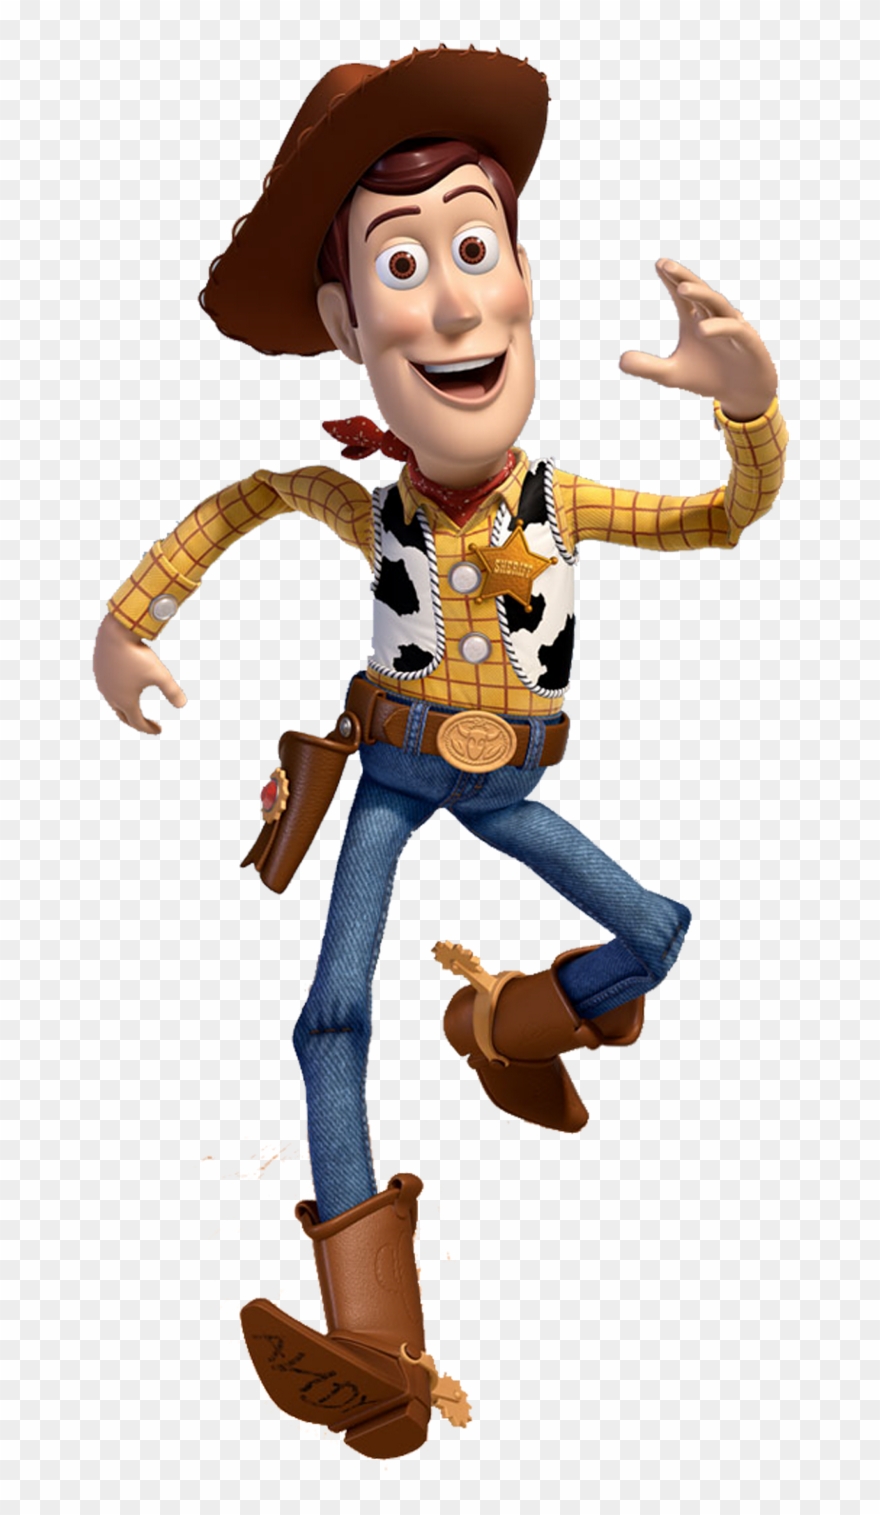 Woody Toy Story Characters Clipart